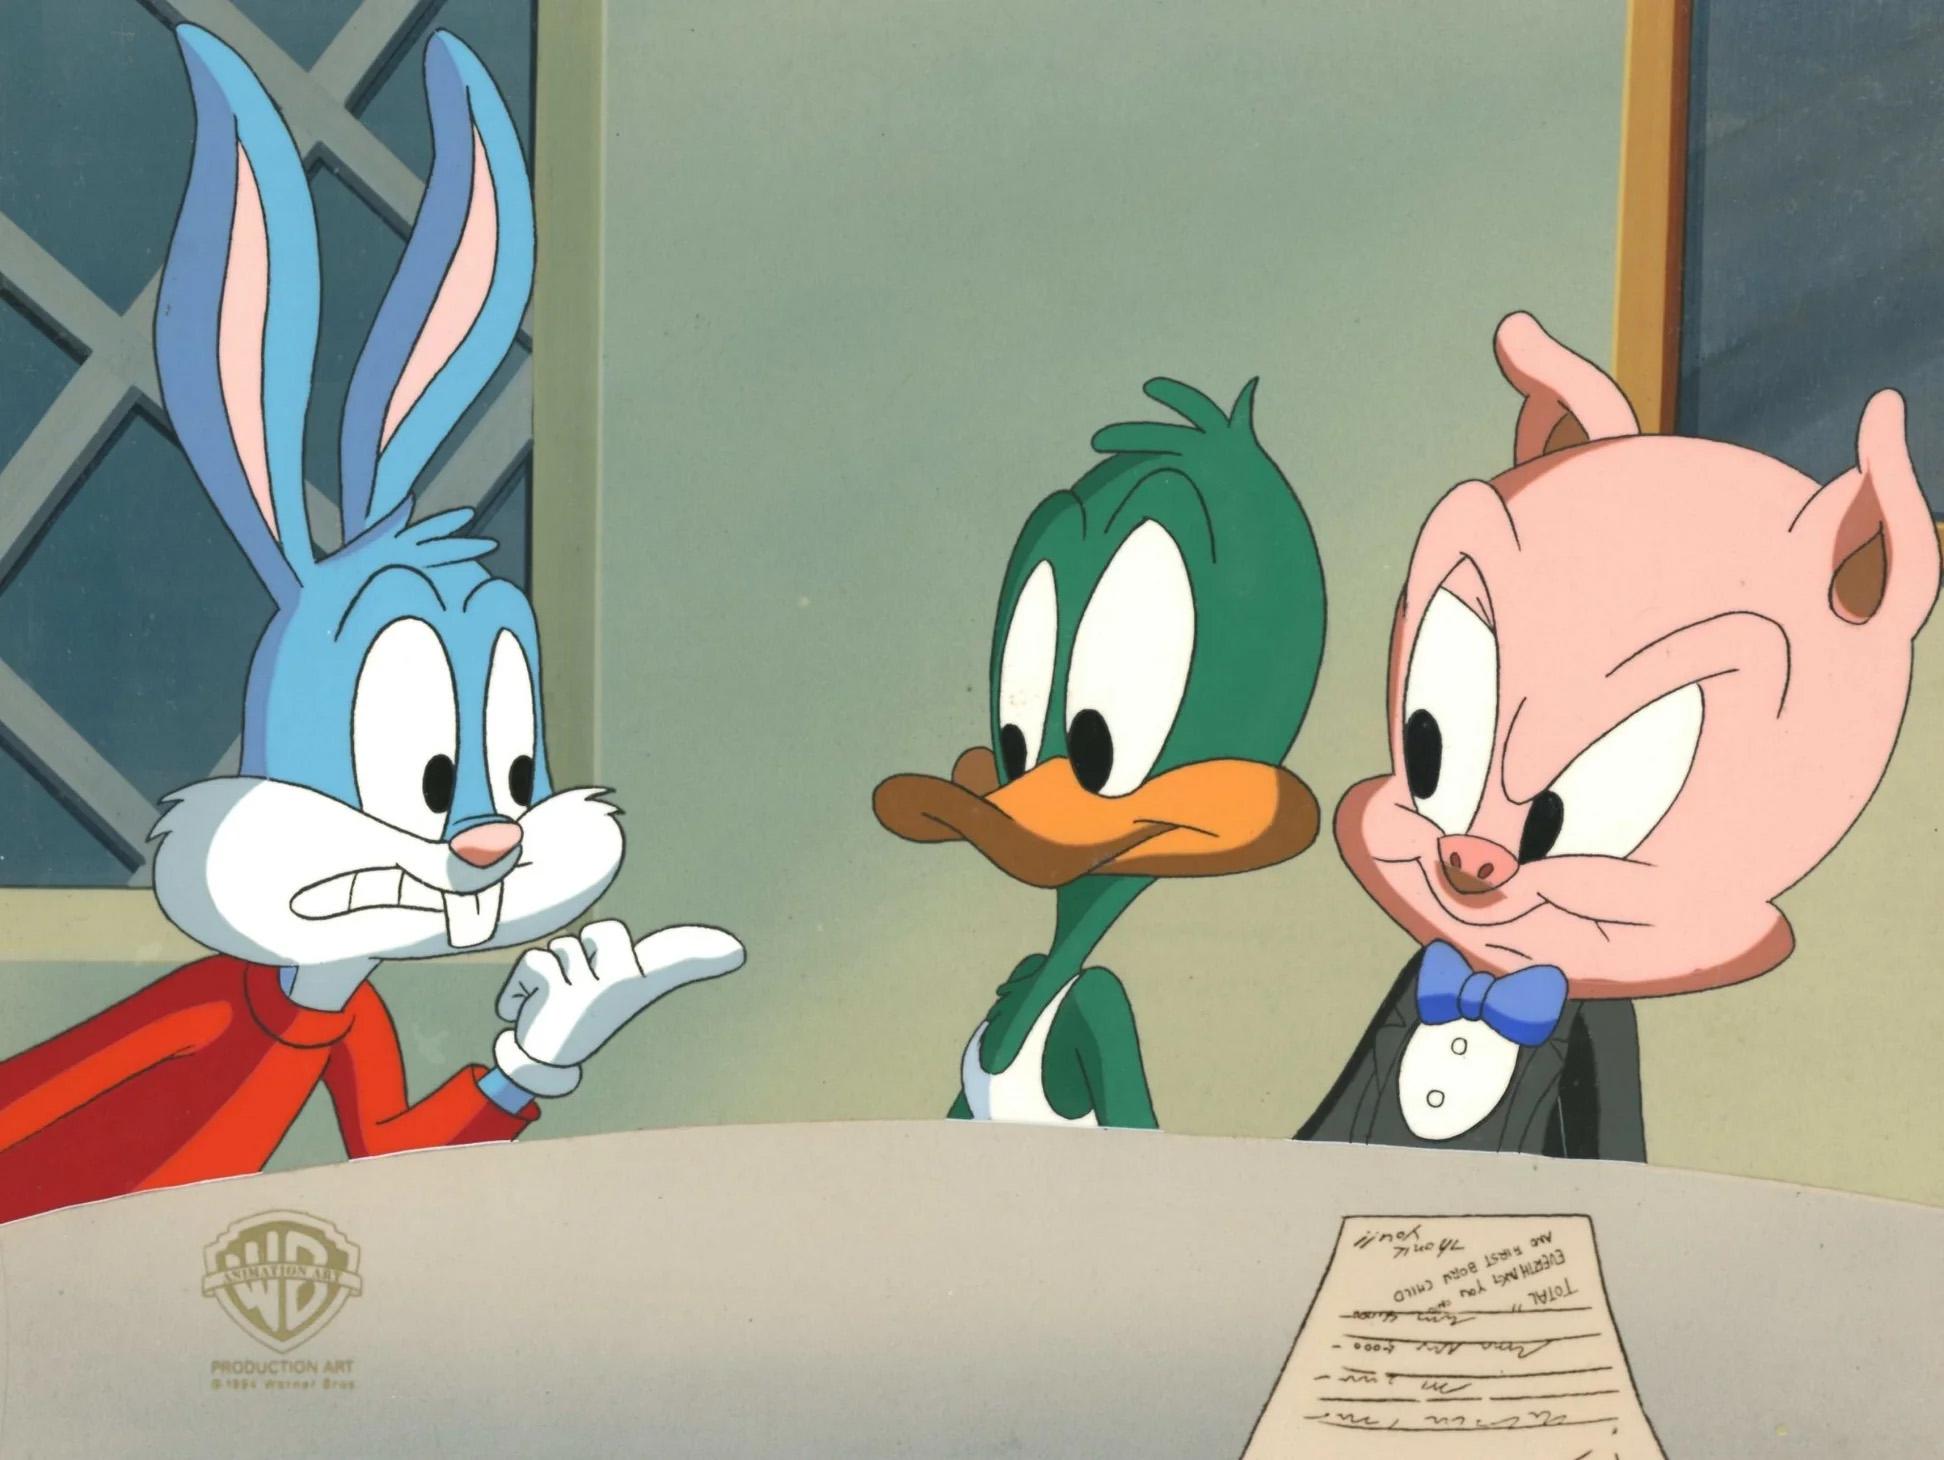 Tiny Toons Original Production Cel: Buster Bunny, Plucky Duck, and Hamton J. Pig - Art by Warner Bros. Studio Artists